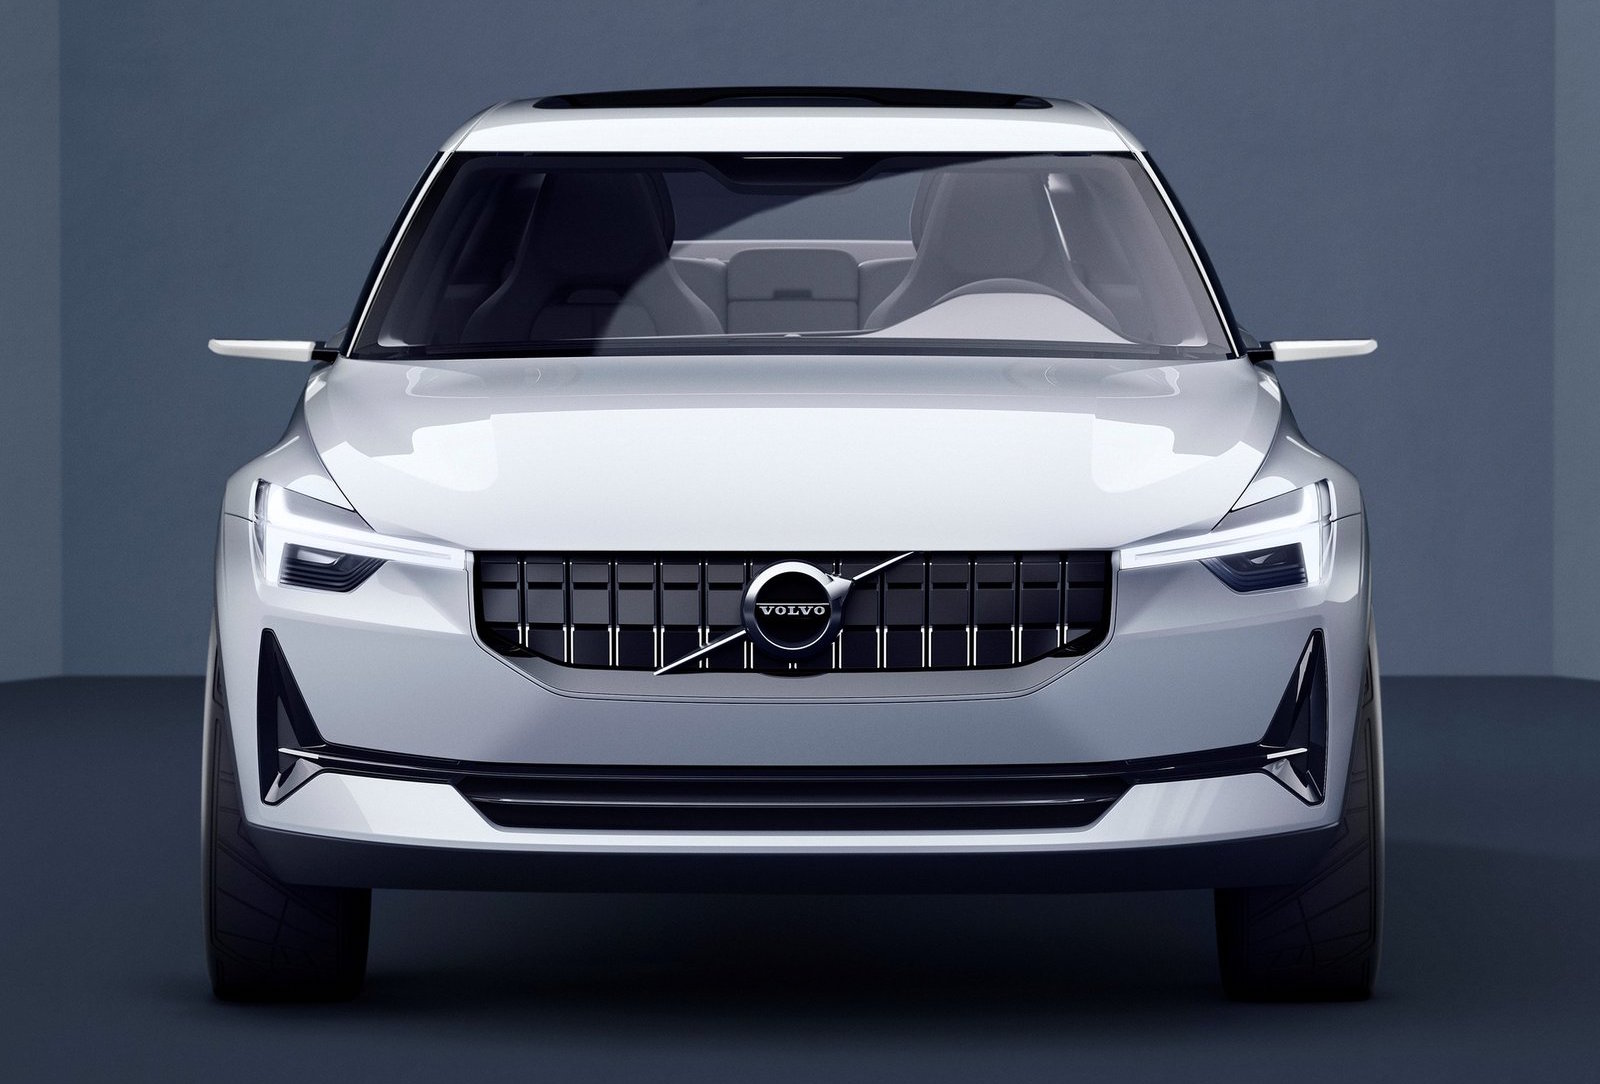 Volvo planning compact ’20 series’ model line to sit beneath 40 series?